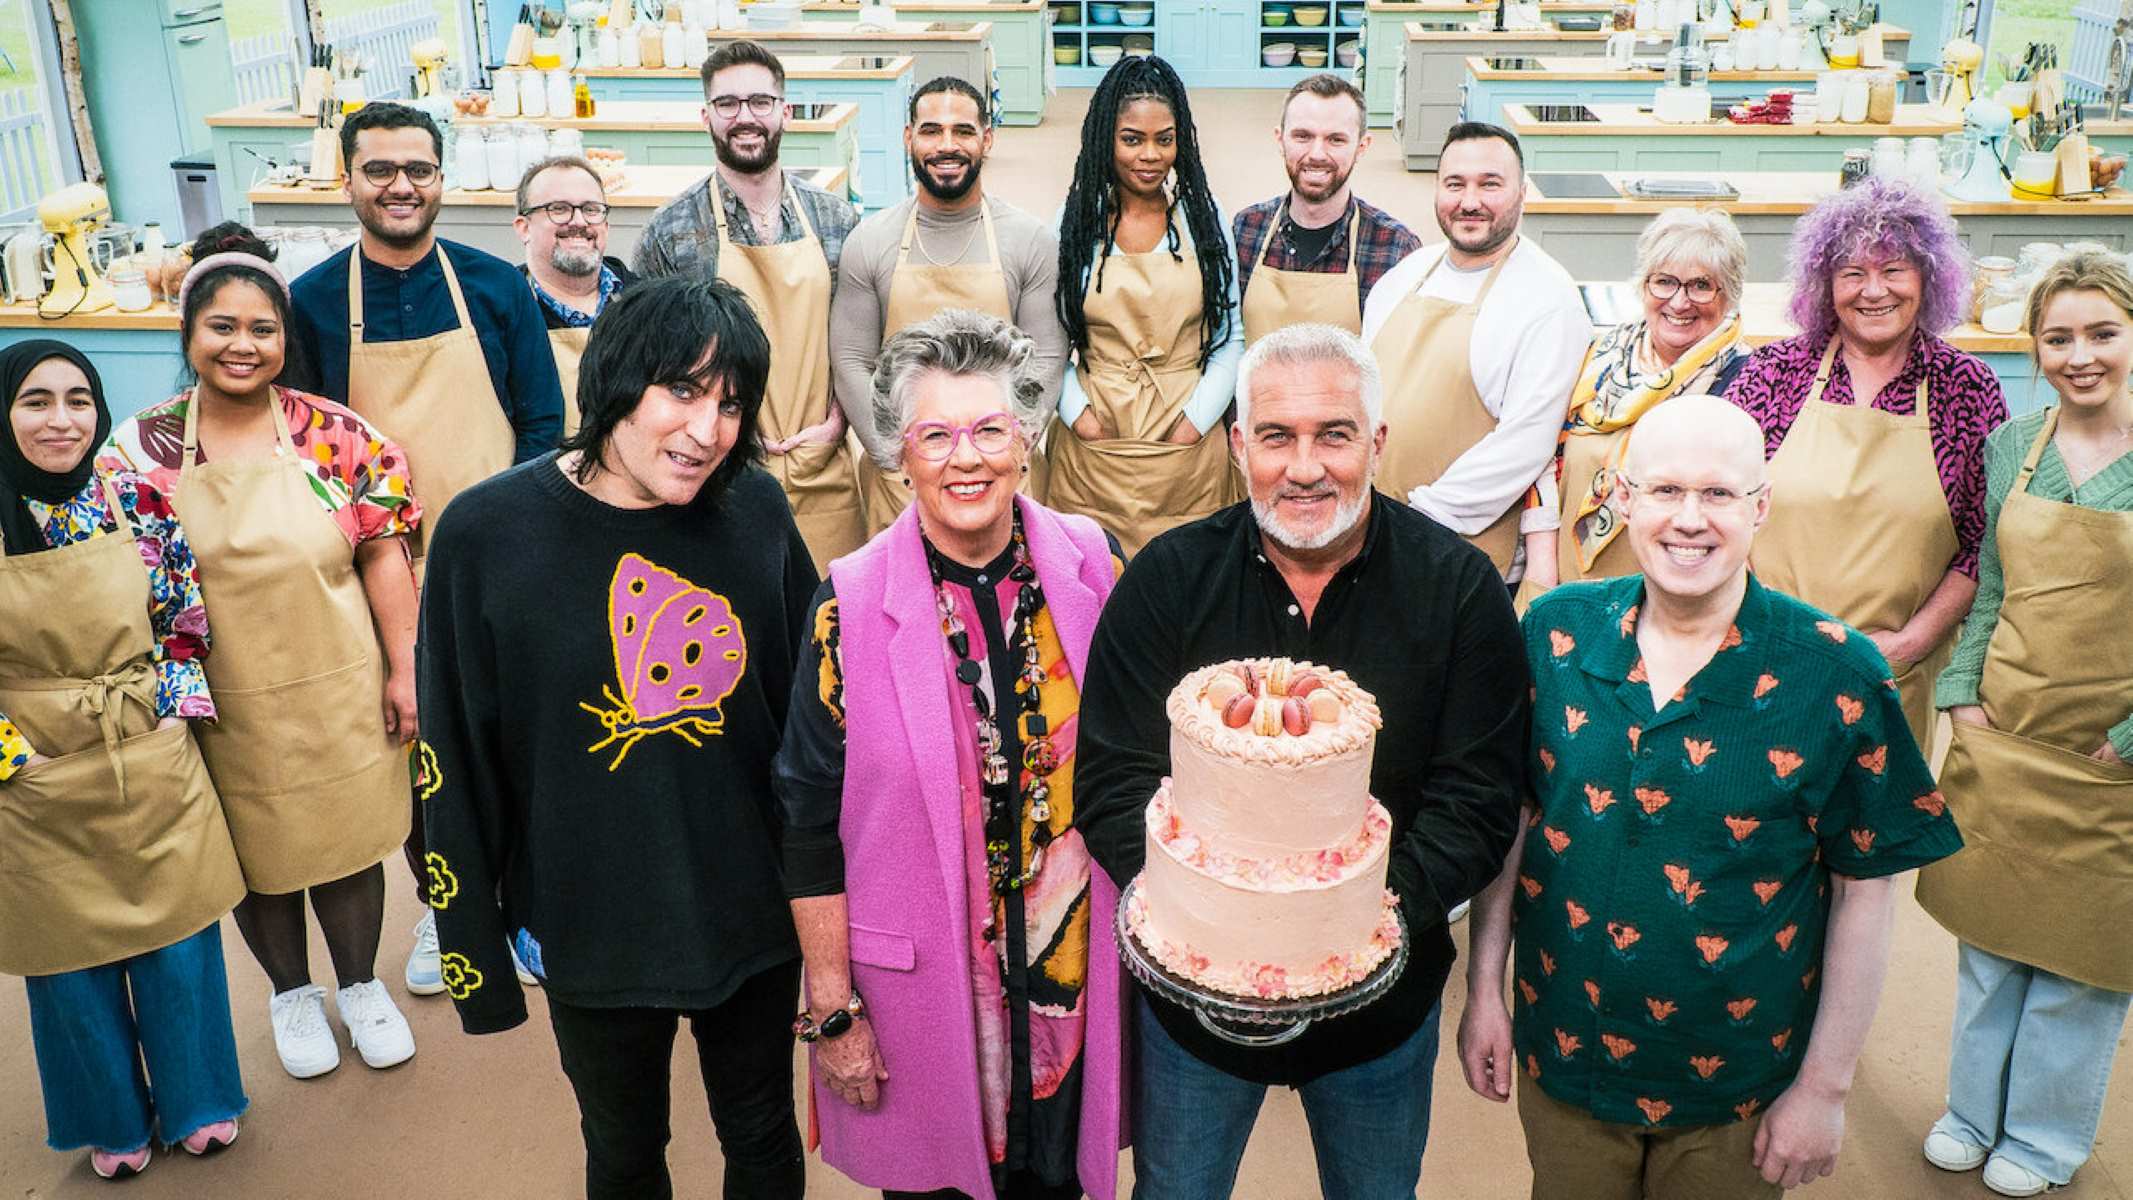 How To Watch The Great British Baking Show